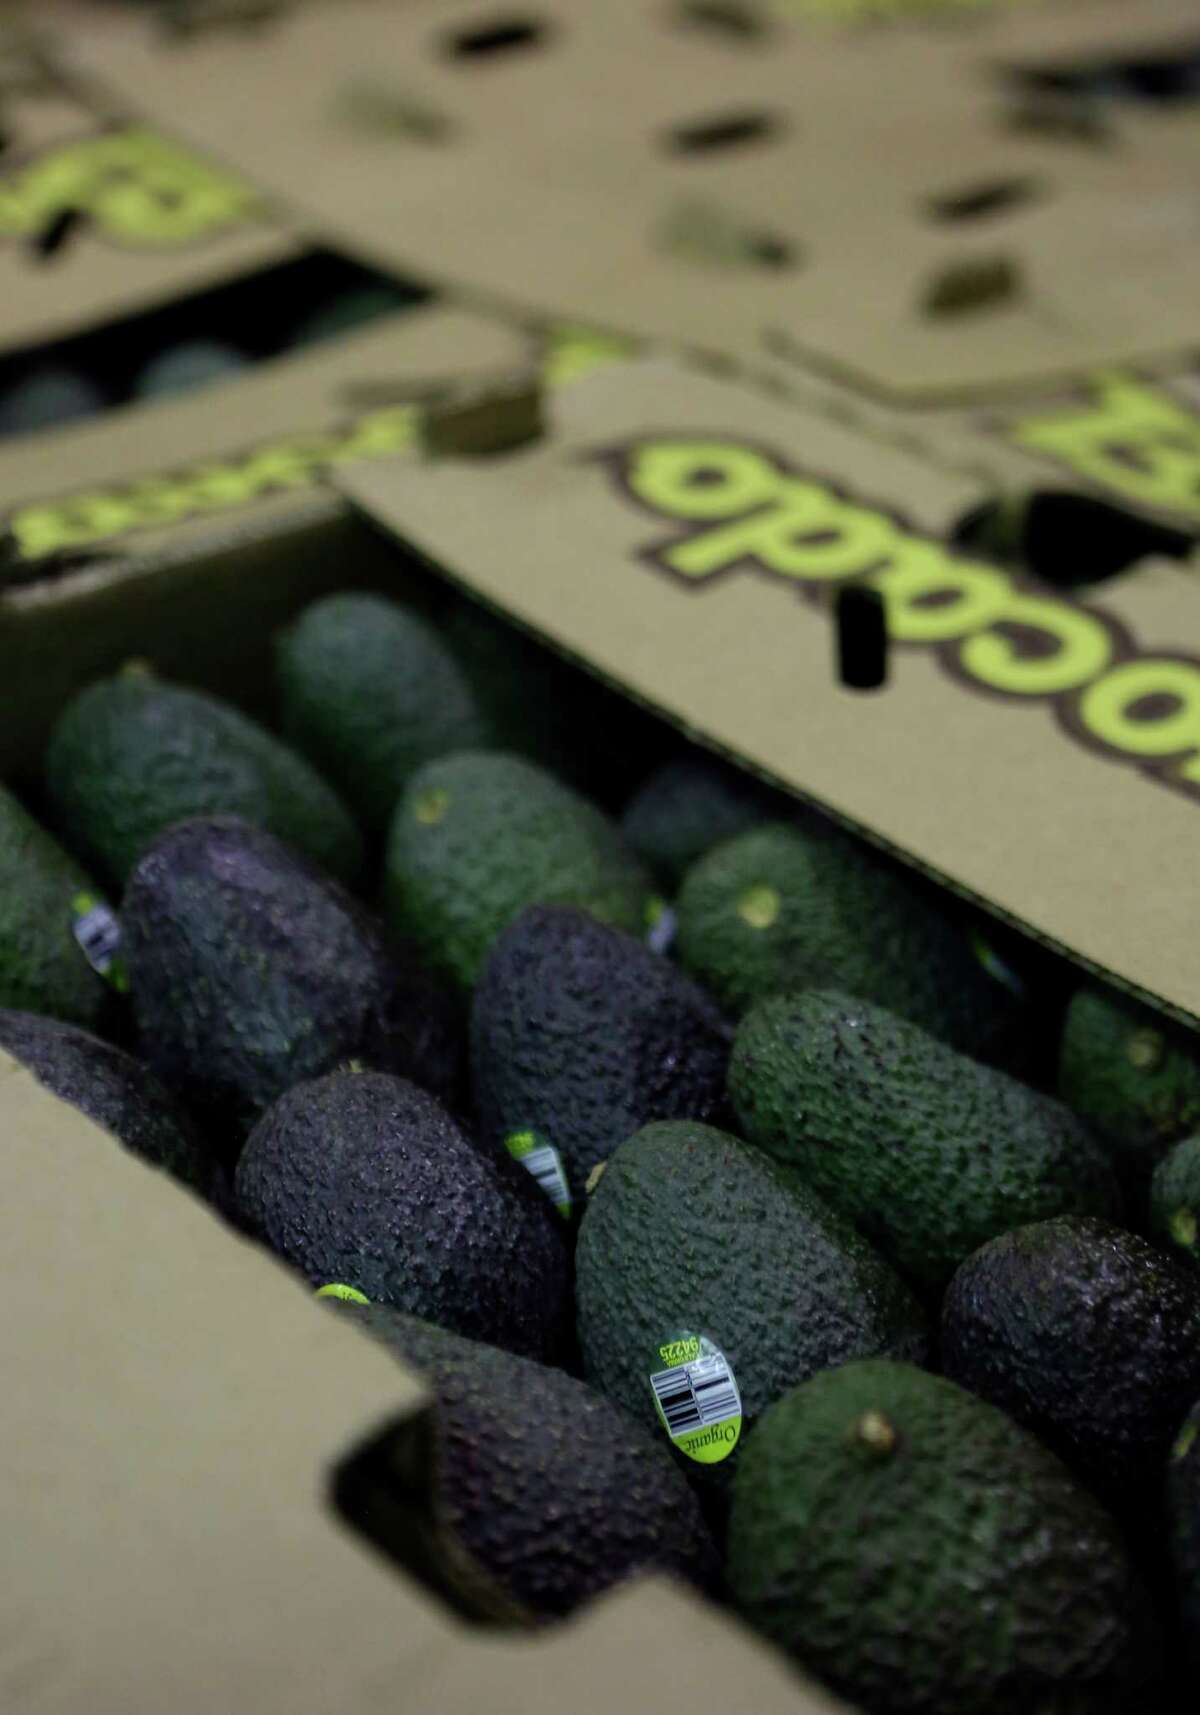 Last year in the United States more than 3.3 billion avocados were consumed. That works out to about 10 per person.